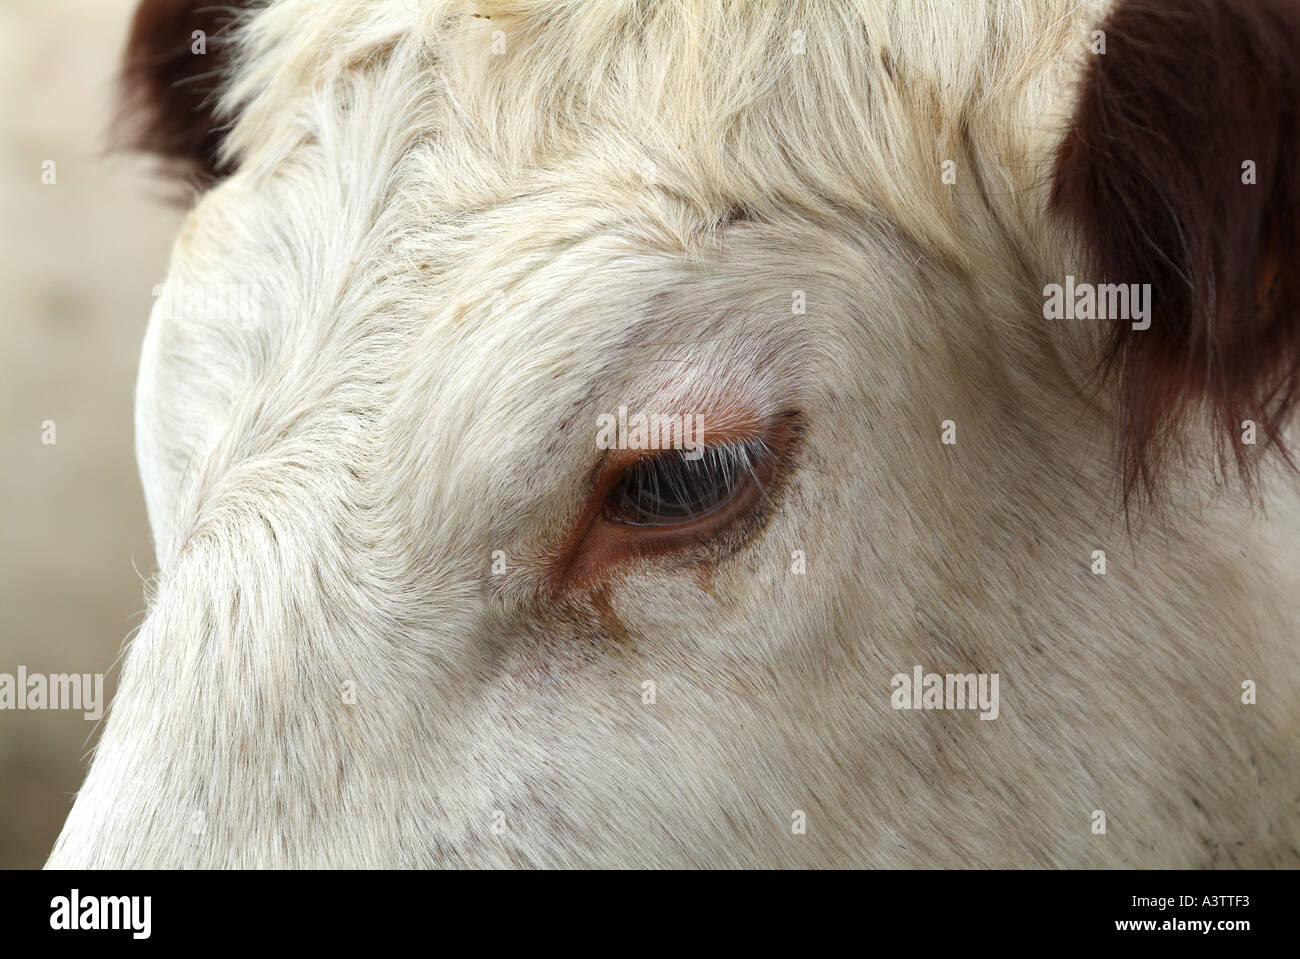 Close up photograph of a British White cows, heifer face. Stock Photo